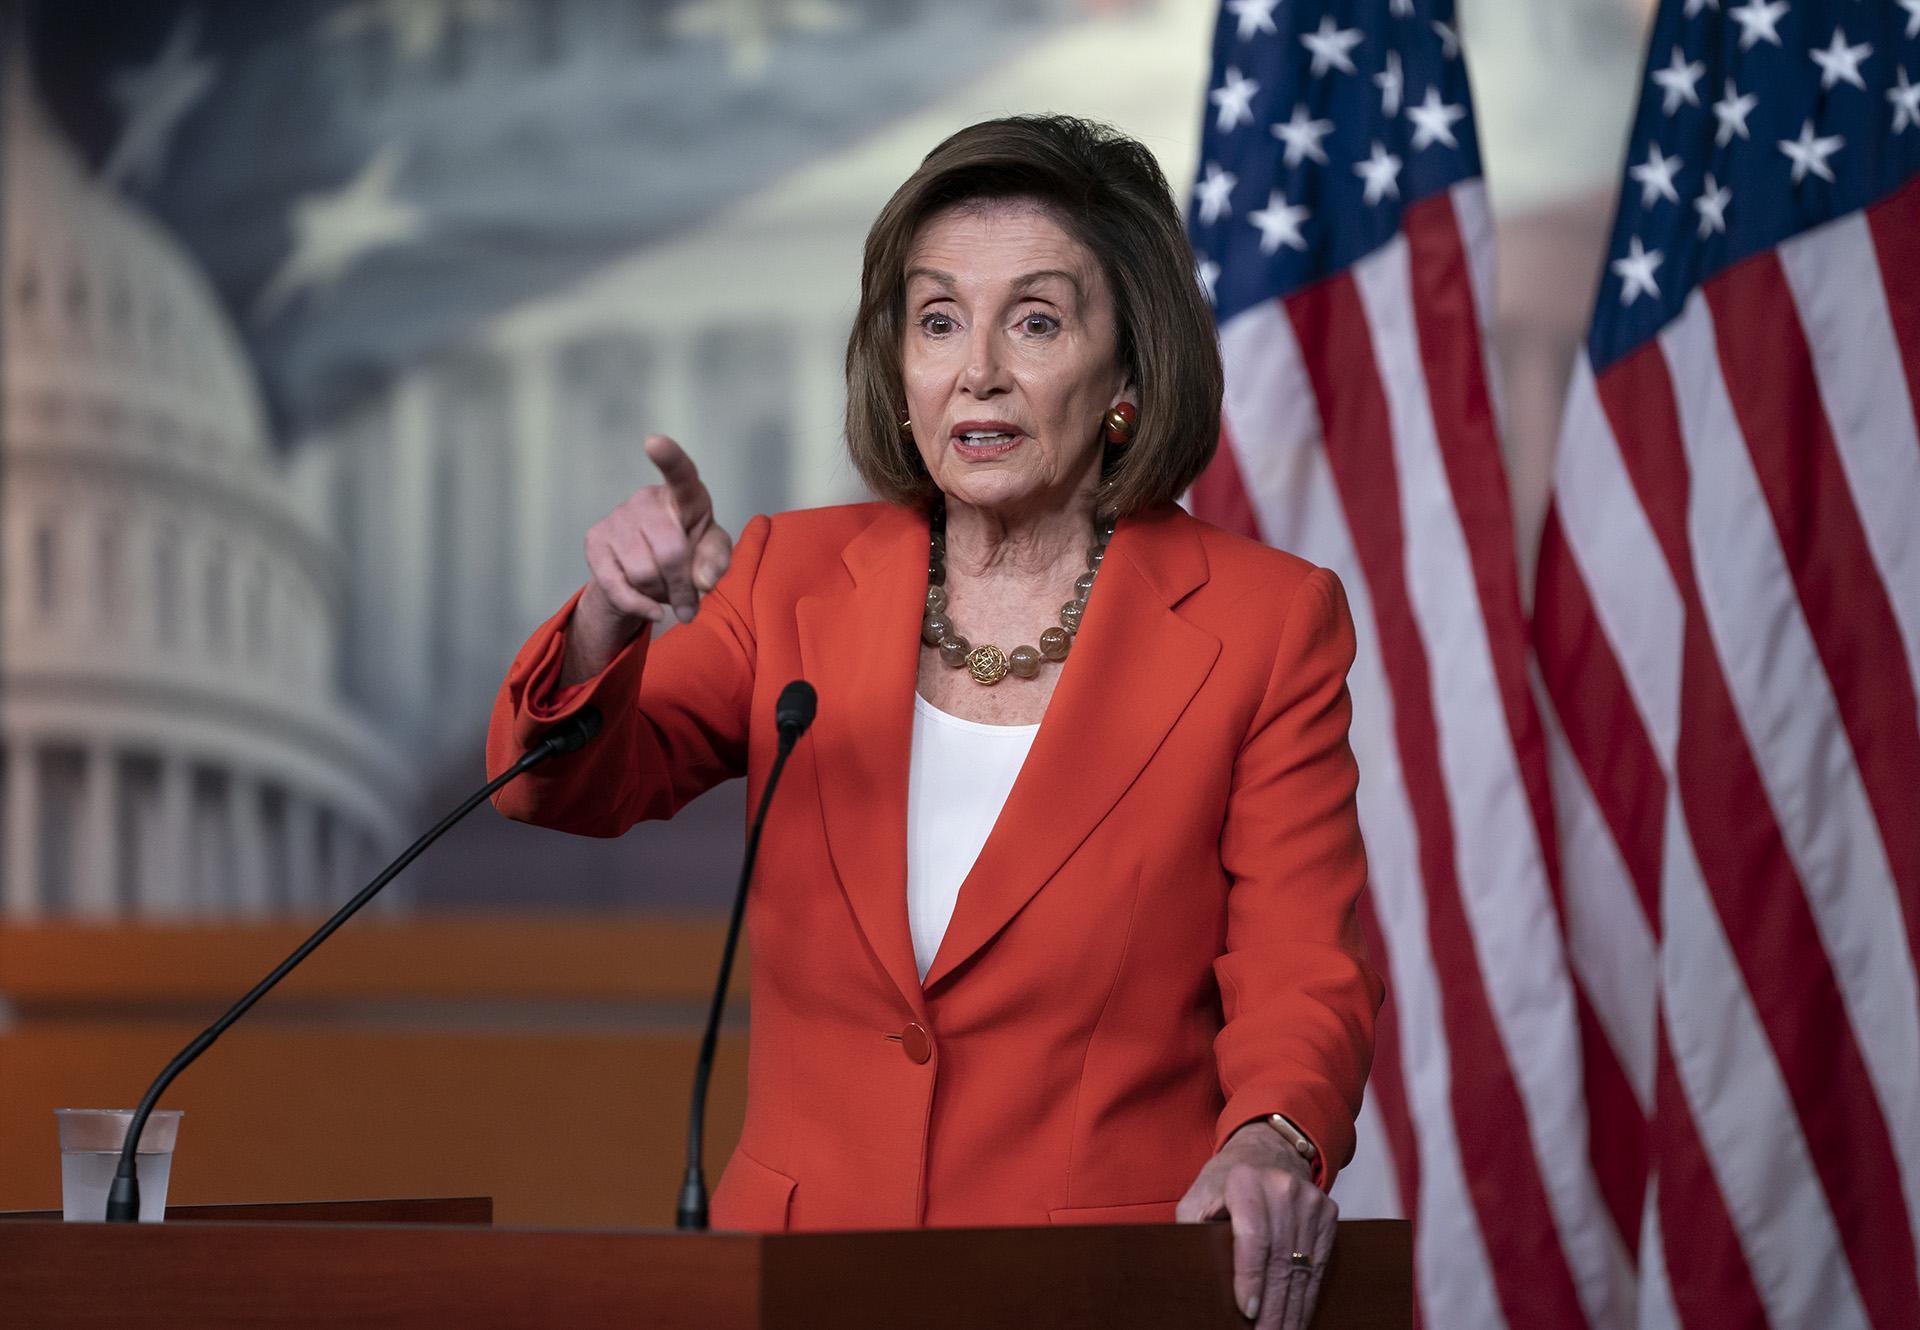 Speaker of the House Nancy Pelosi, D-Calif., talks to reporters just before the House vote on a resolution to formalize the impeachment investigation of President Donald Trump, in Washington, Thursday, Oct. 31, 2019. (AP Photo / J. Scott Applewhite)